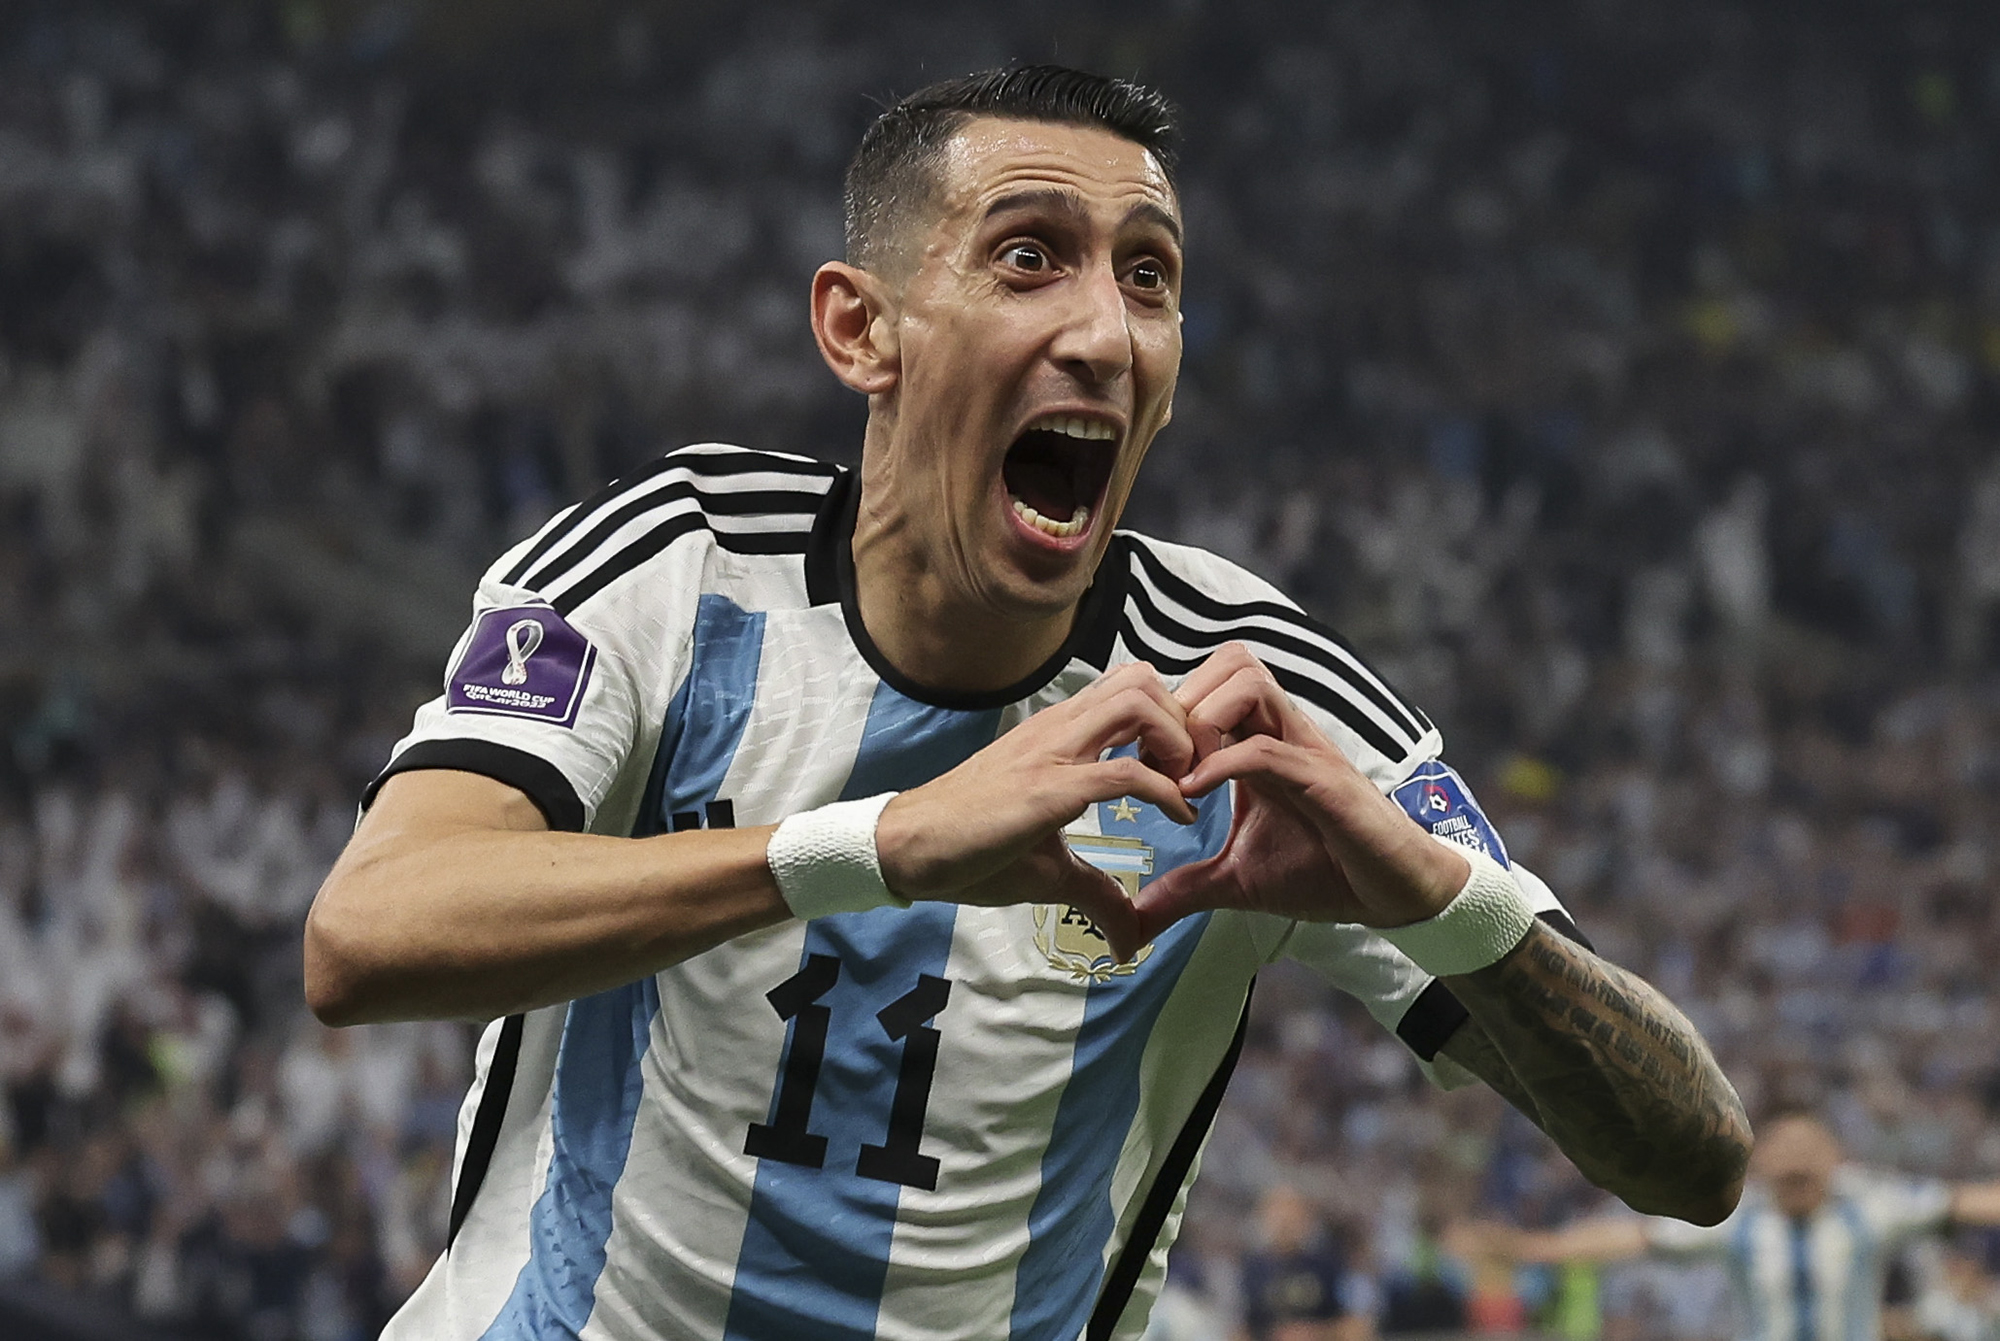 Angel Di Maria celebrates after giving Argentina a 2-0 lead.